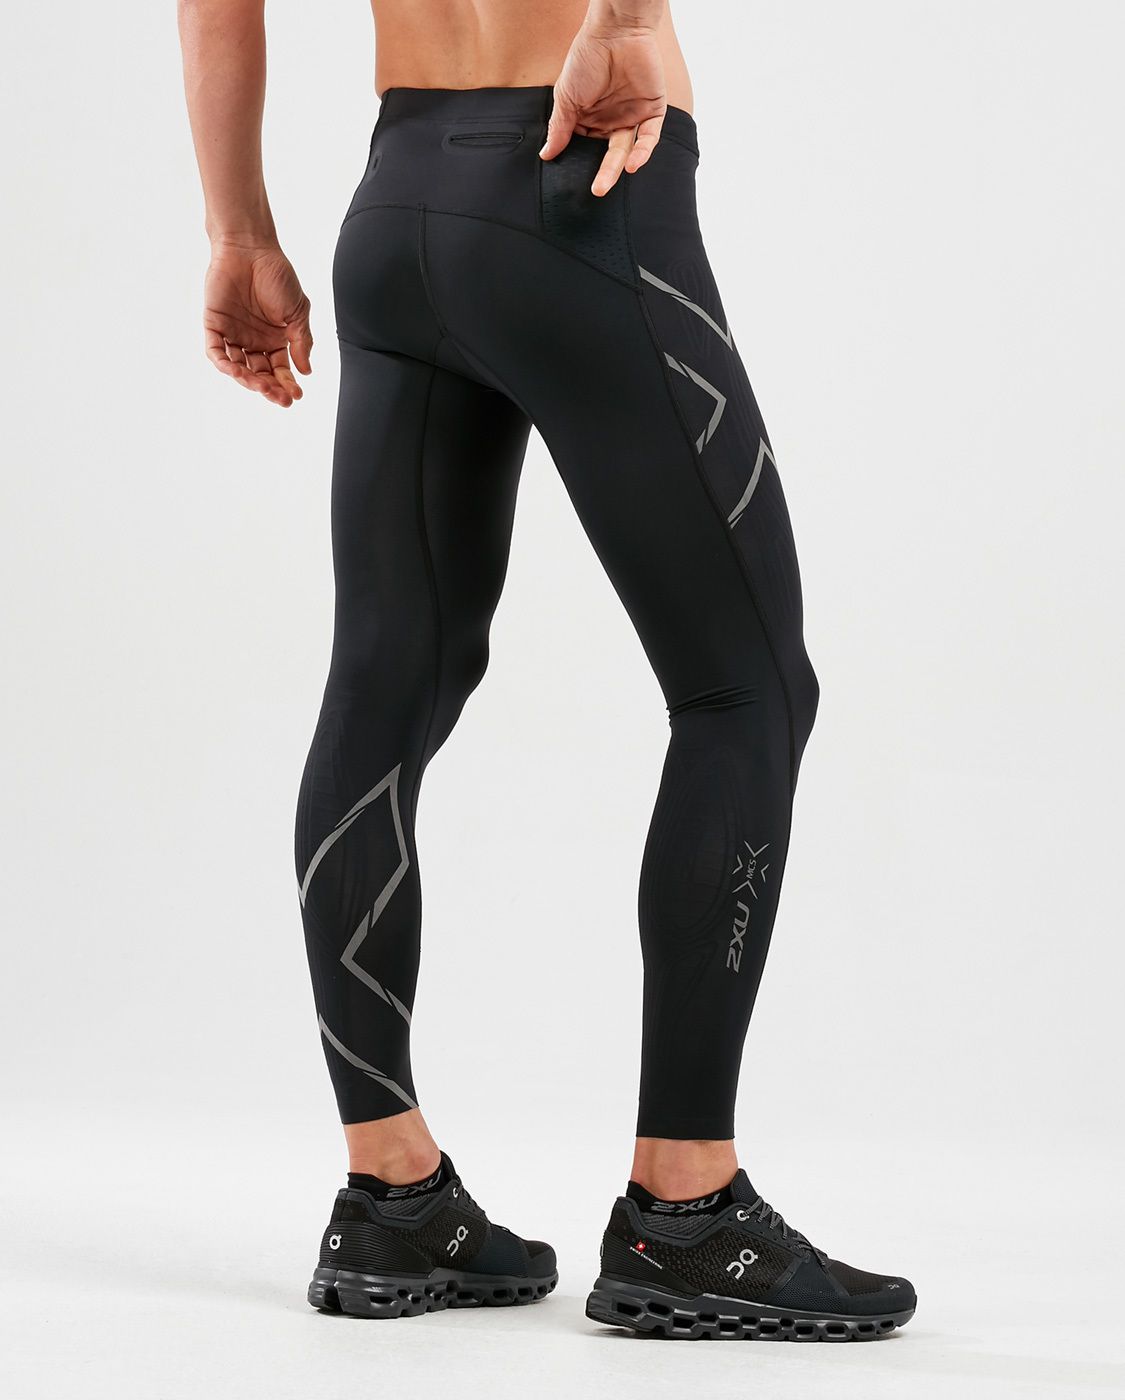 2XU MCS Run Compression Tights for Men with Back Storage | Vitality Medical